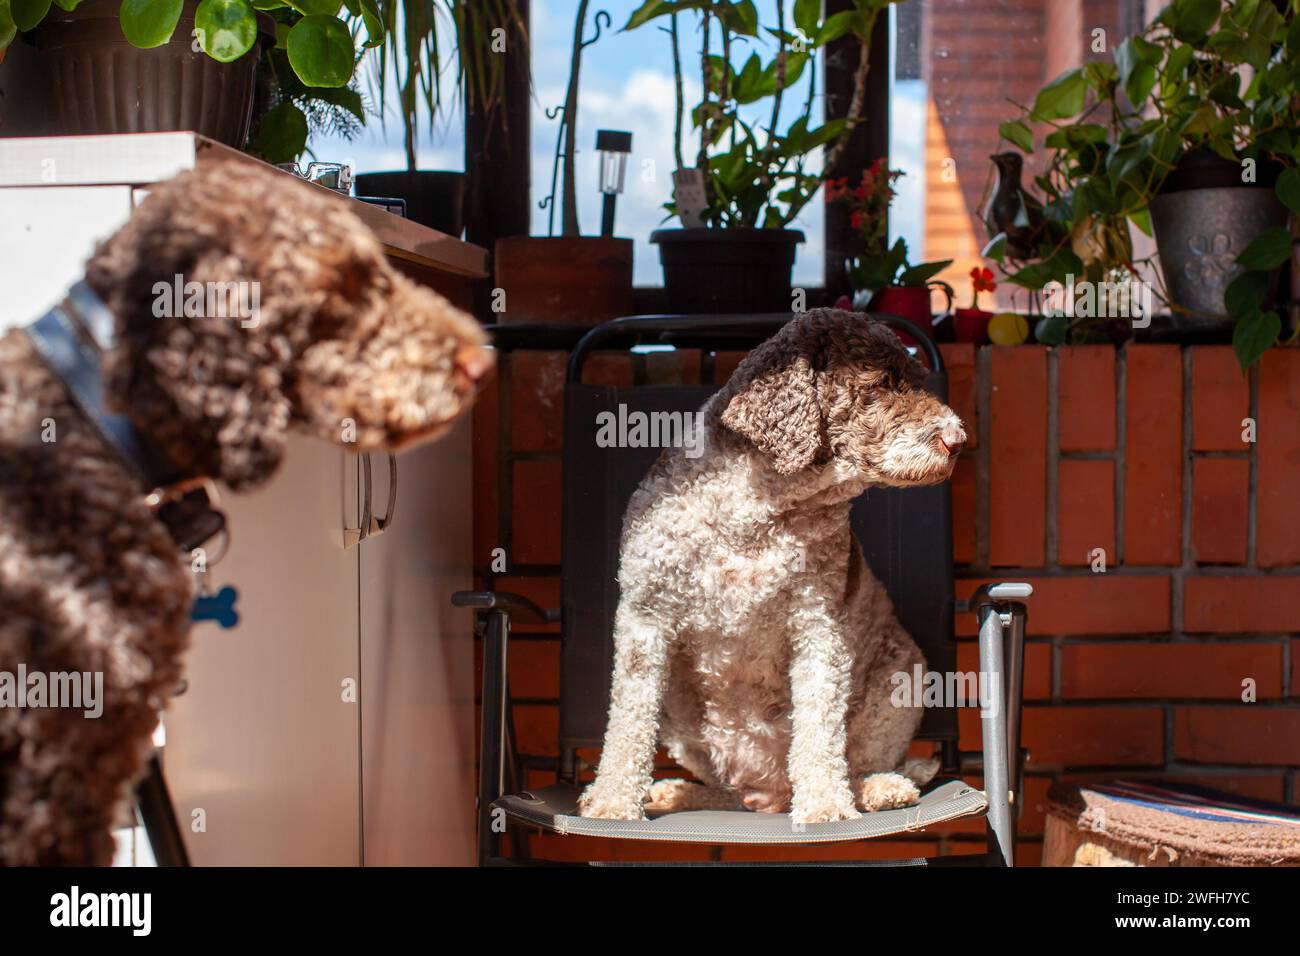 two lagotto romagnolo dogs sitting on chairs Stock Photo